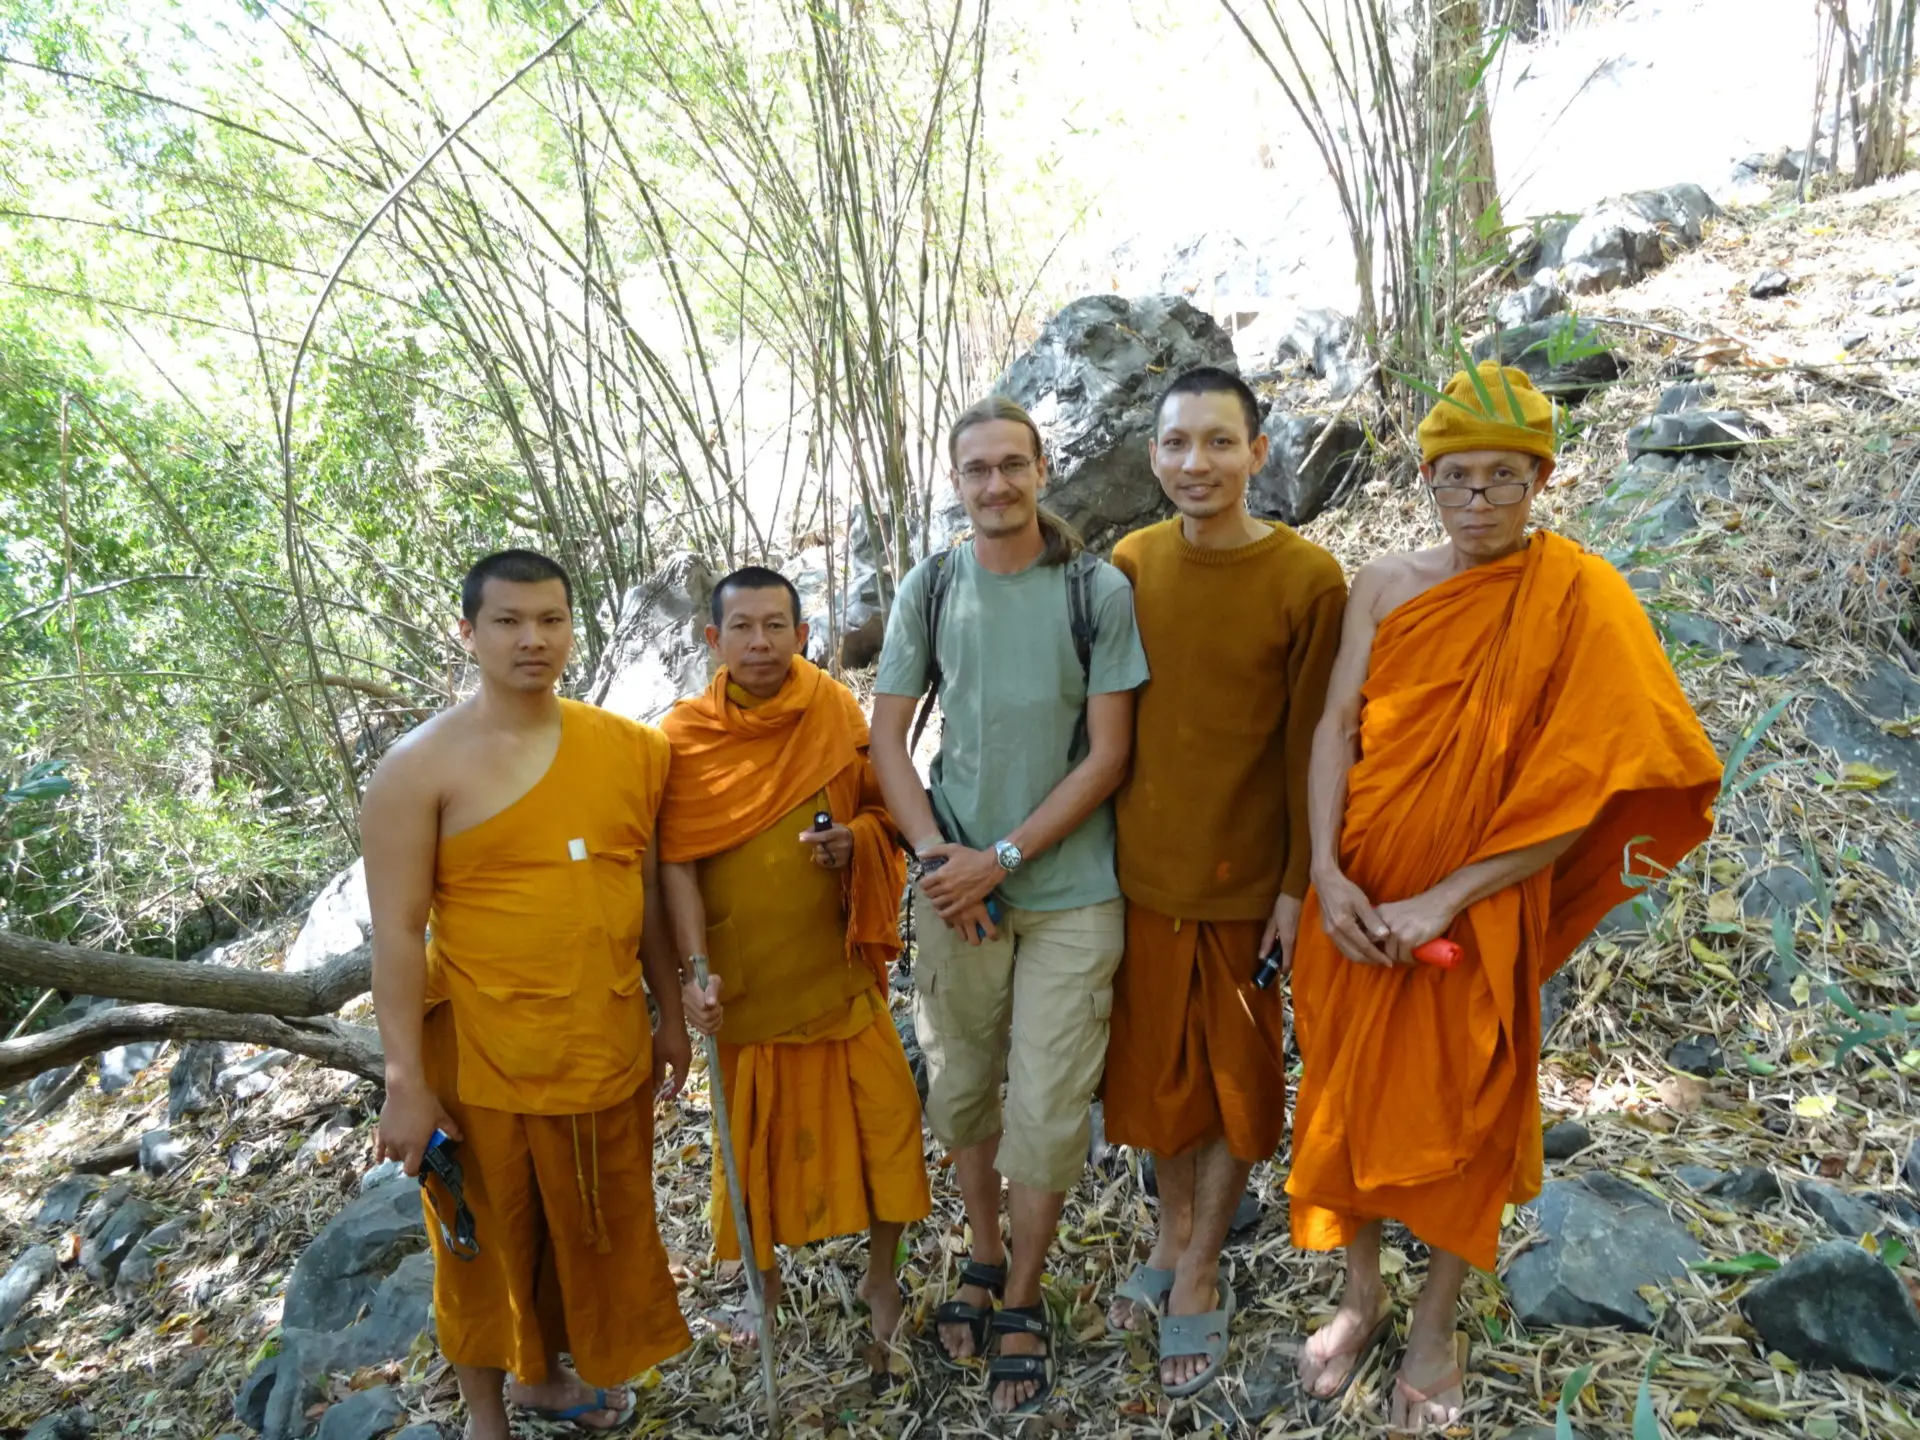 A traveller surrounded by four Buddhist Monks near Lopburi, Thailand